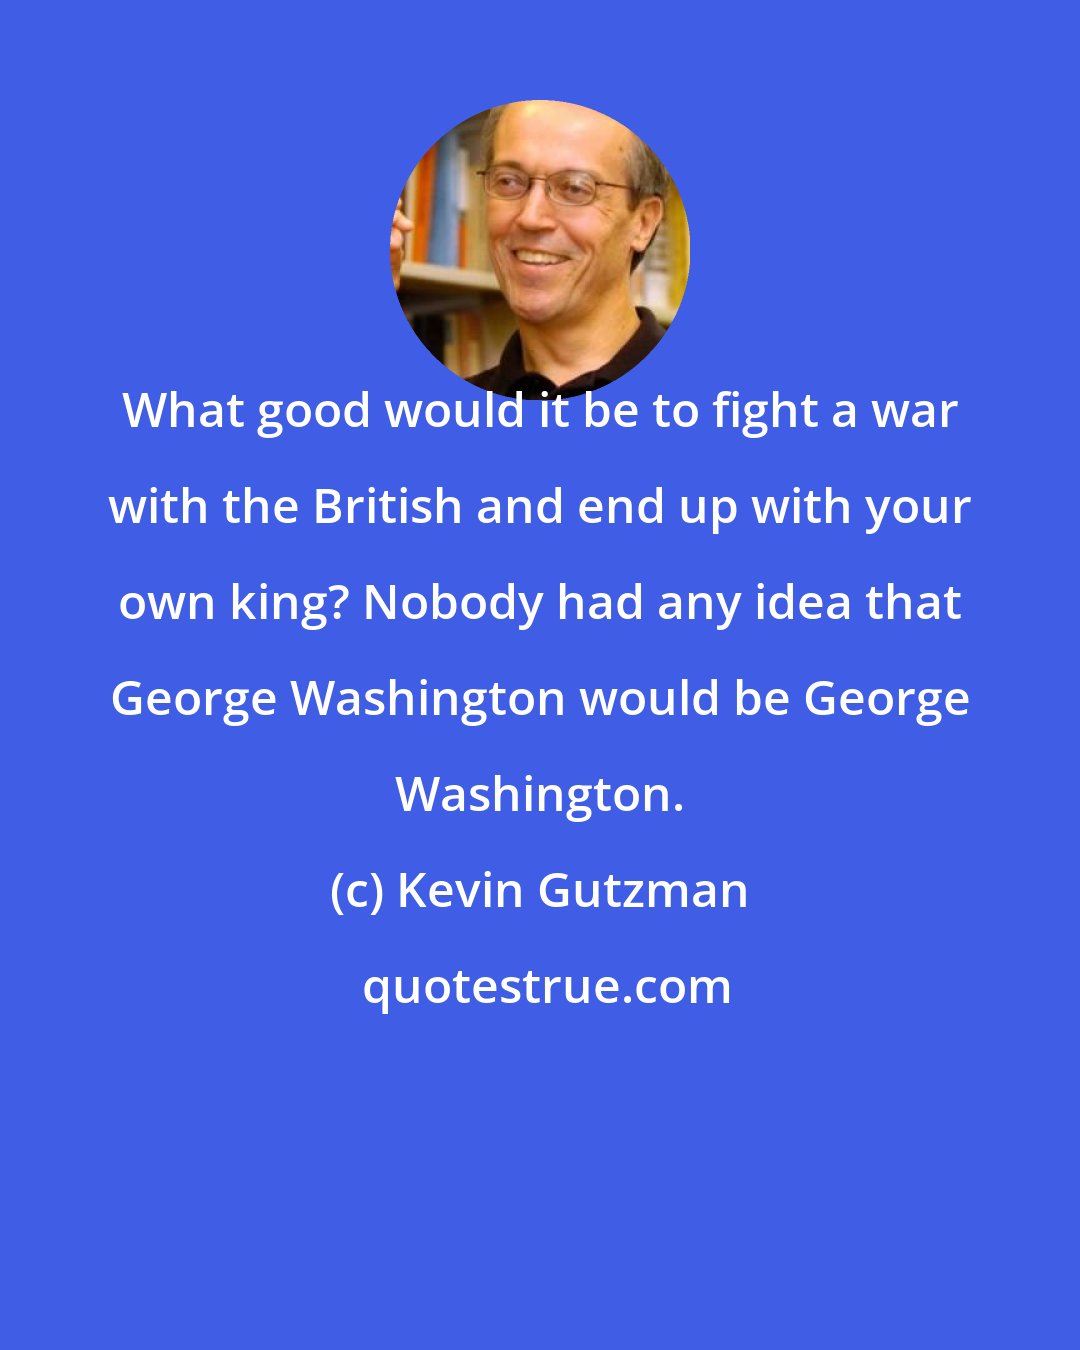 Kevin Gutzman: What good would it be to fight a war with the British and end up with your own king? Nobody had any idea that George Washington would be George Washington.